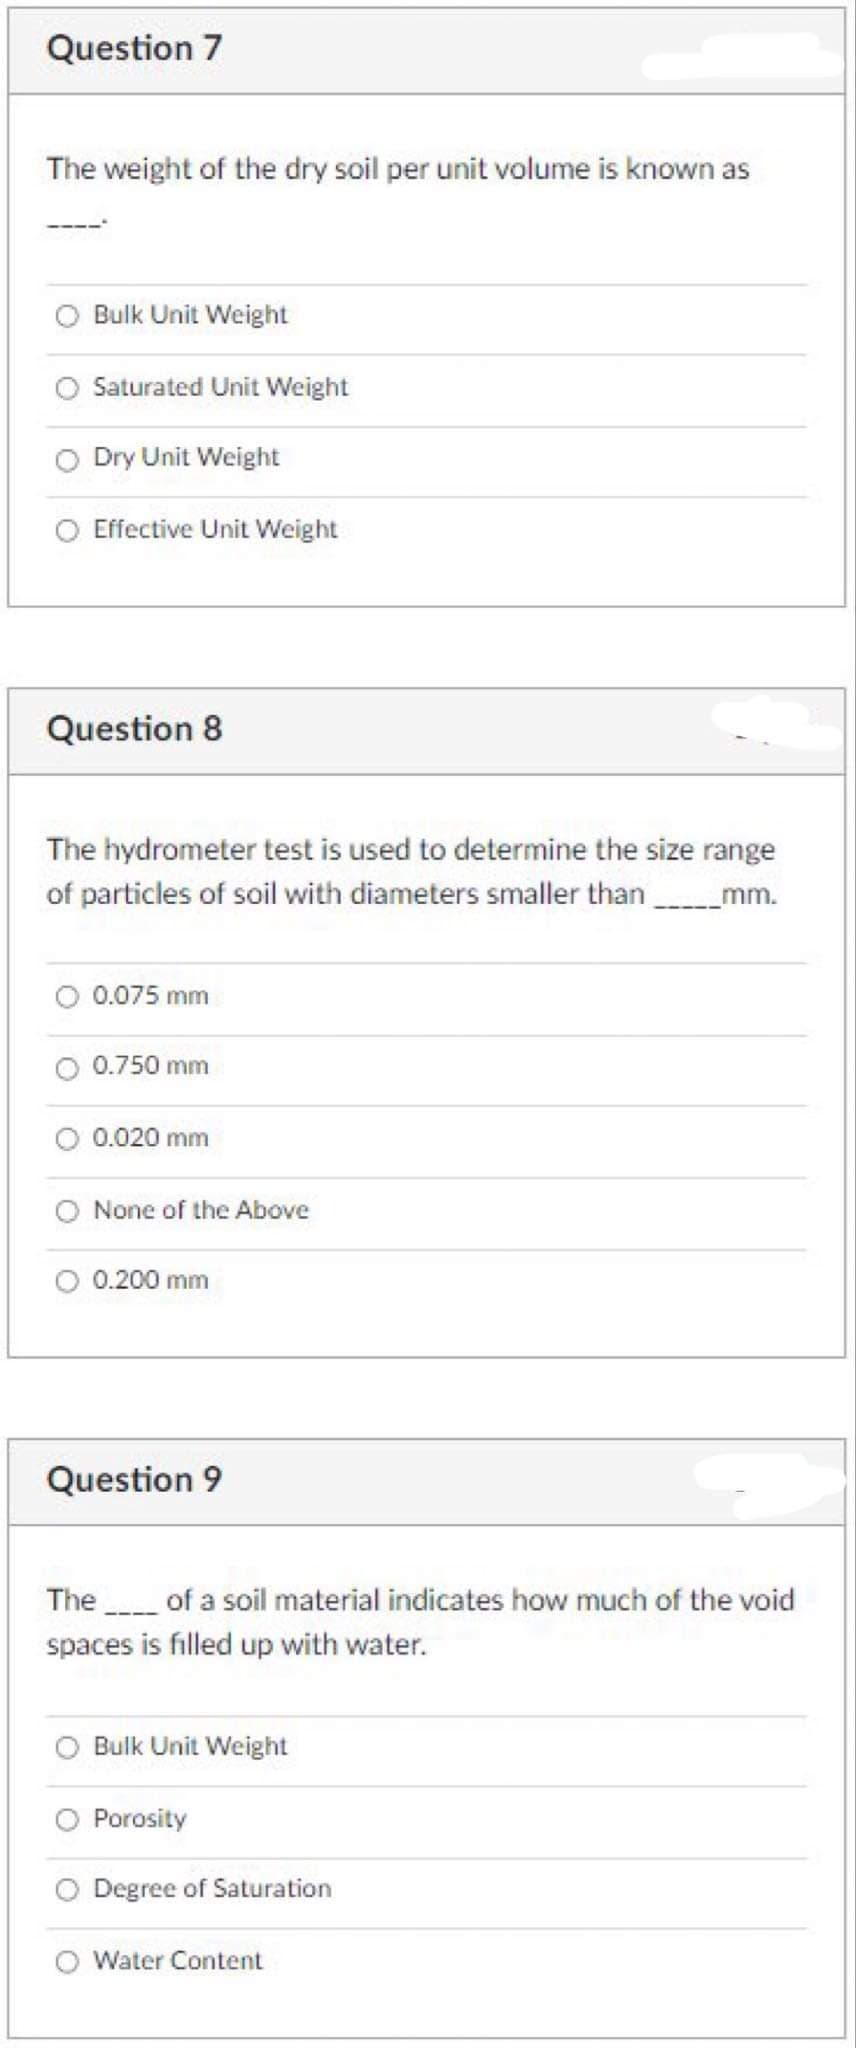 Question 7
The weight of the dry soil per unit volume is known as
Bulk Unit Weight
Saturated Unit Weight
Dry Unit Weight
Effective Unit Weight
Question 8
The hydrometer test is used to determine the size range
of particles of soil with diameters smaller than mm.
0.075 mm
0.750 mm
0.020 mm
None of the Above
0.200 mm
Question 9
The of a soil material indicates how much of the void
spaces is filled up with water.
Bulk Unit Weight
Porosity
Degree of Saturation
Water Content
